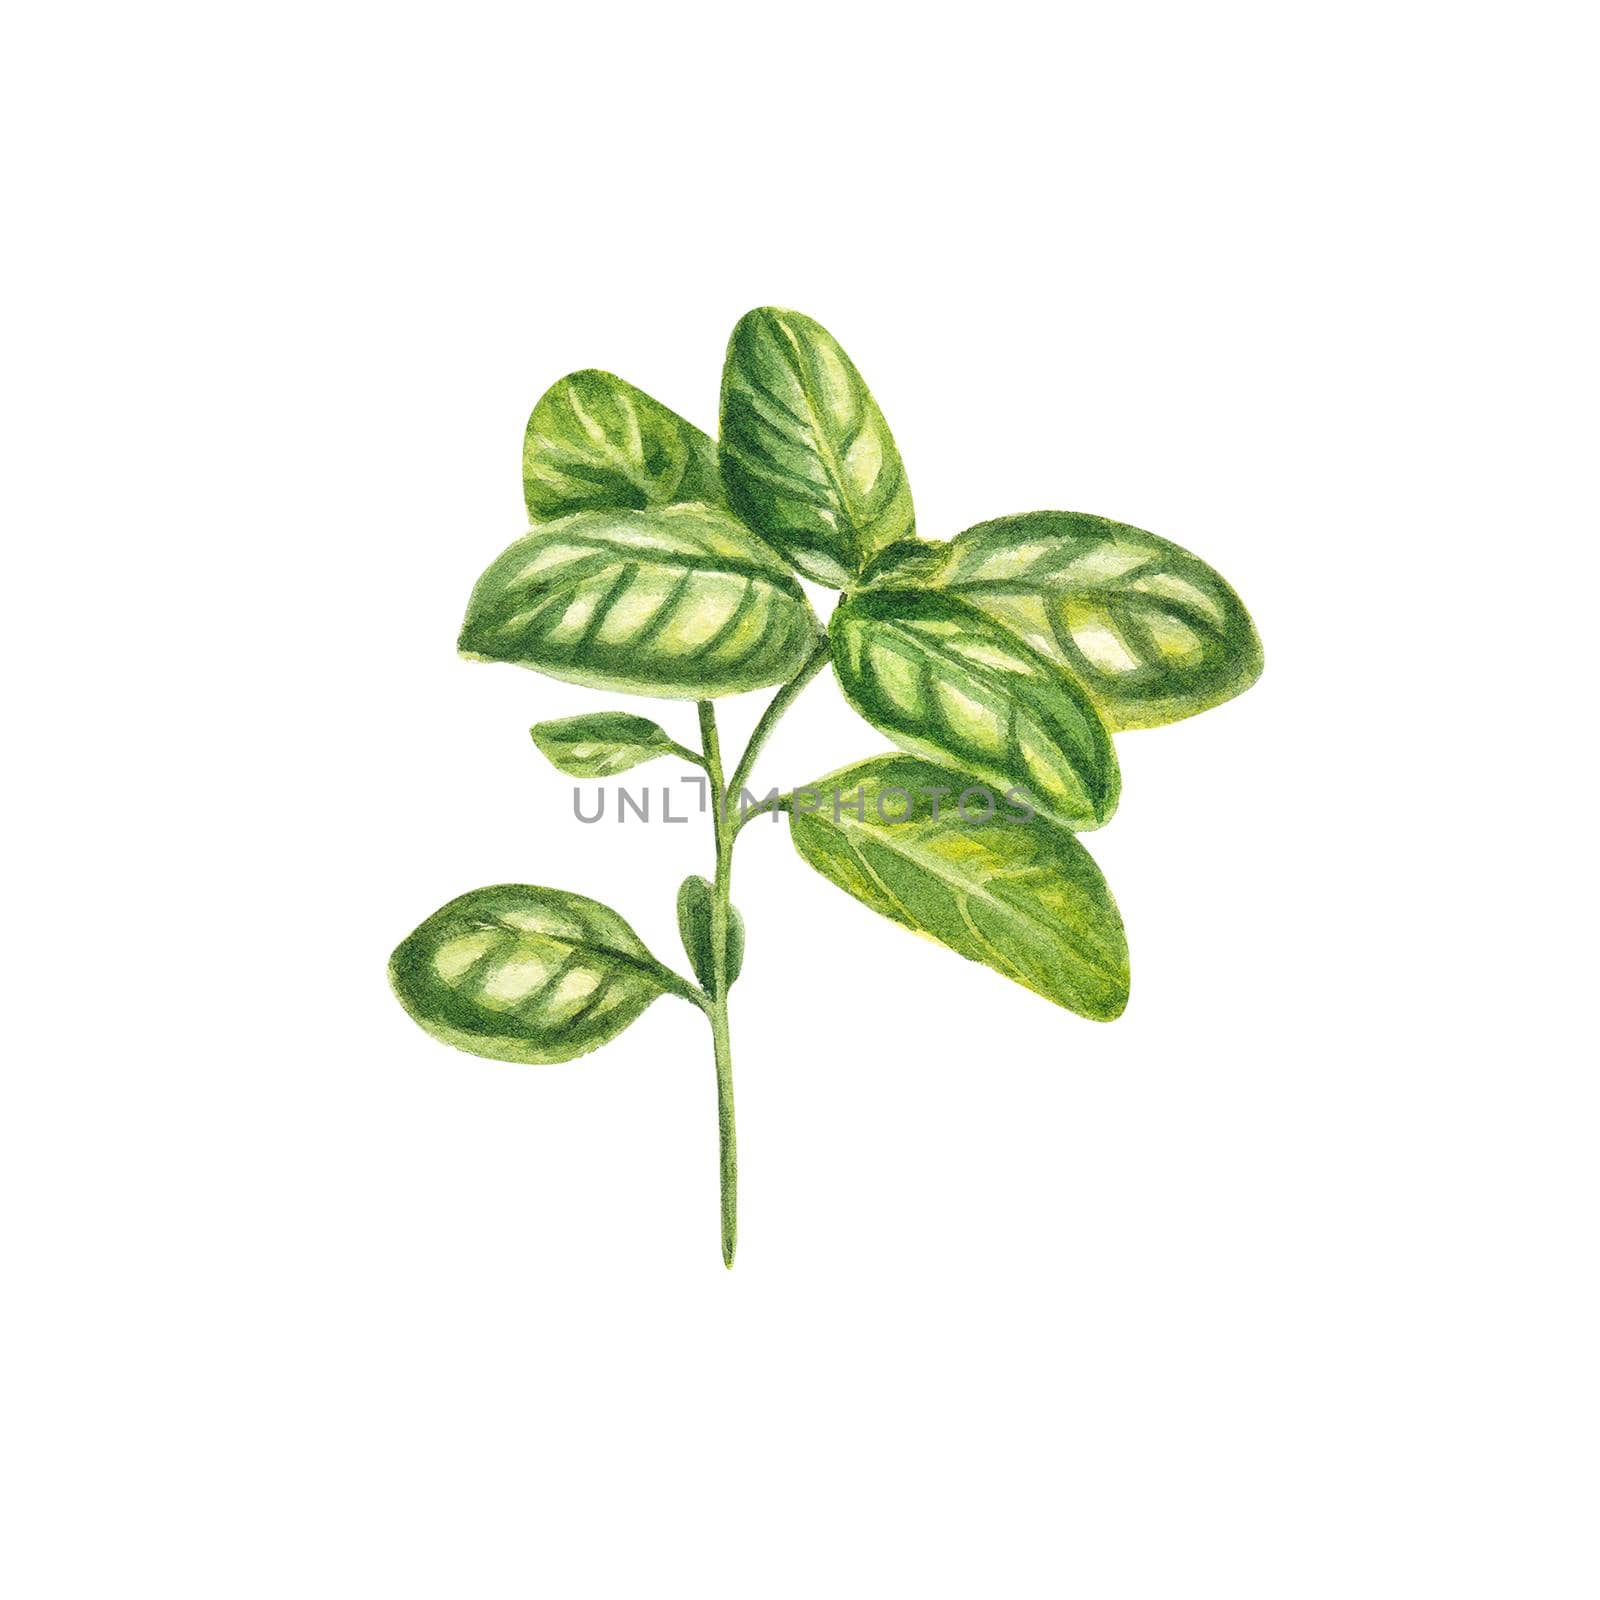 Basil in watercolor on a white background. One sprig of Provencal herbs: marjoram, basil, cumin, rosemary. The illustration is suitable for design, booklet, menu, flyers, invitations. Realistic branch